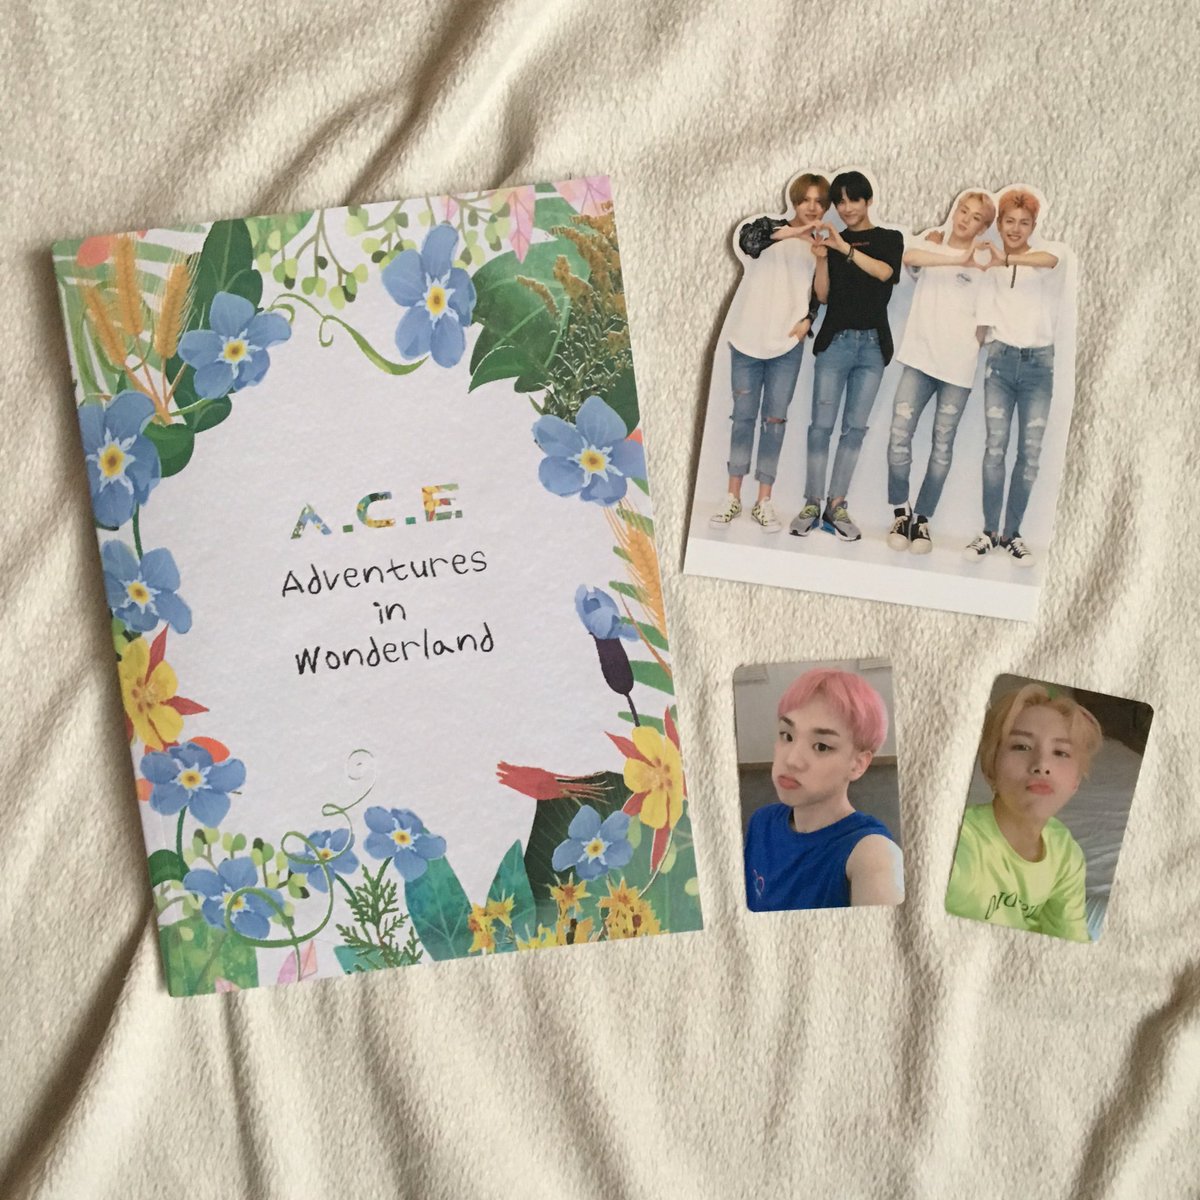 a.c.e . . . adventures in wonderland♡.° 1st repackaged album⠀⠀ ⠀⇢ day version⠀⠀ ⠀take me higher⠀⠀ ⠀2018